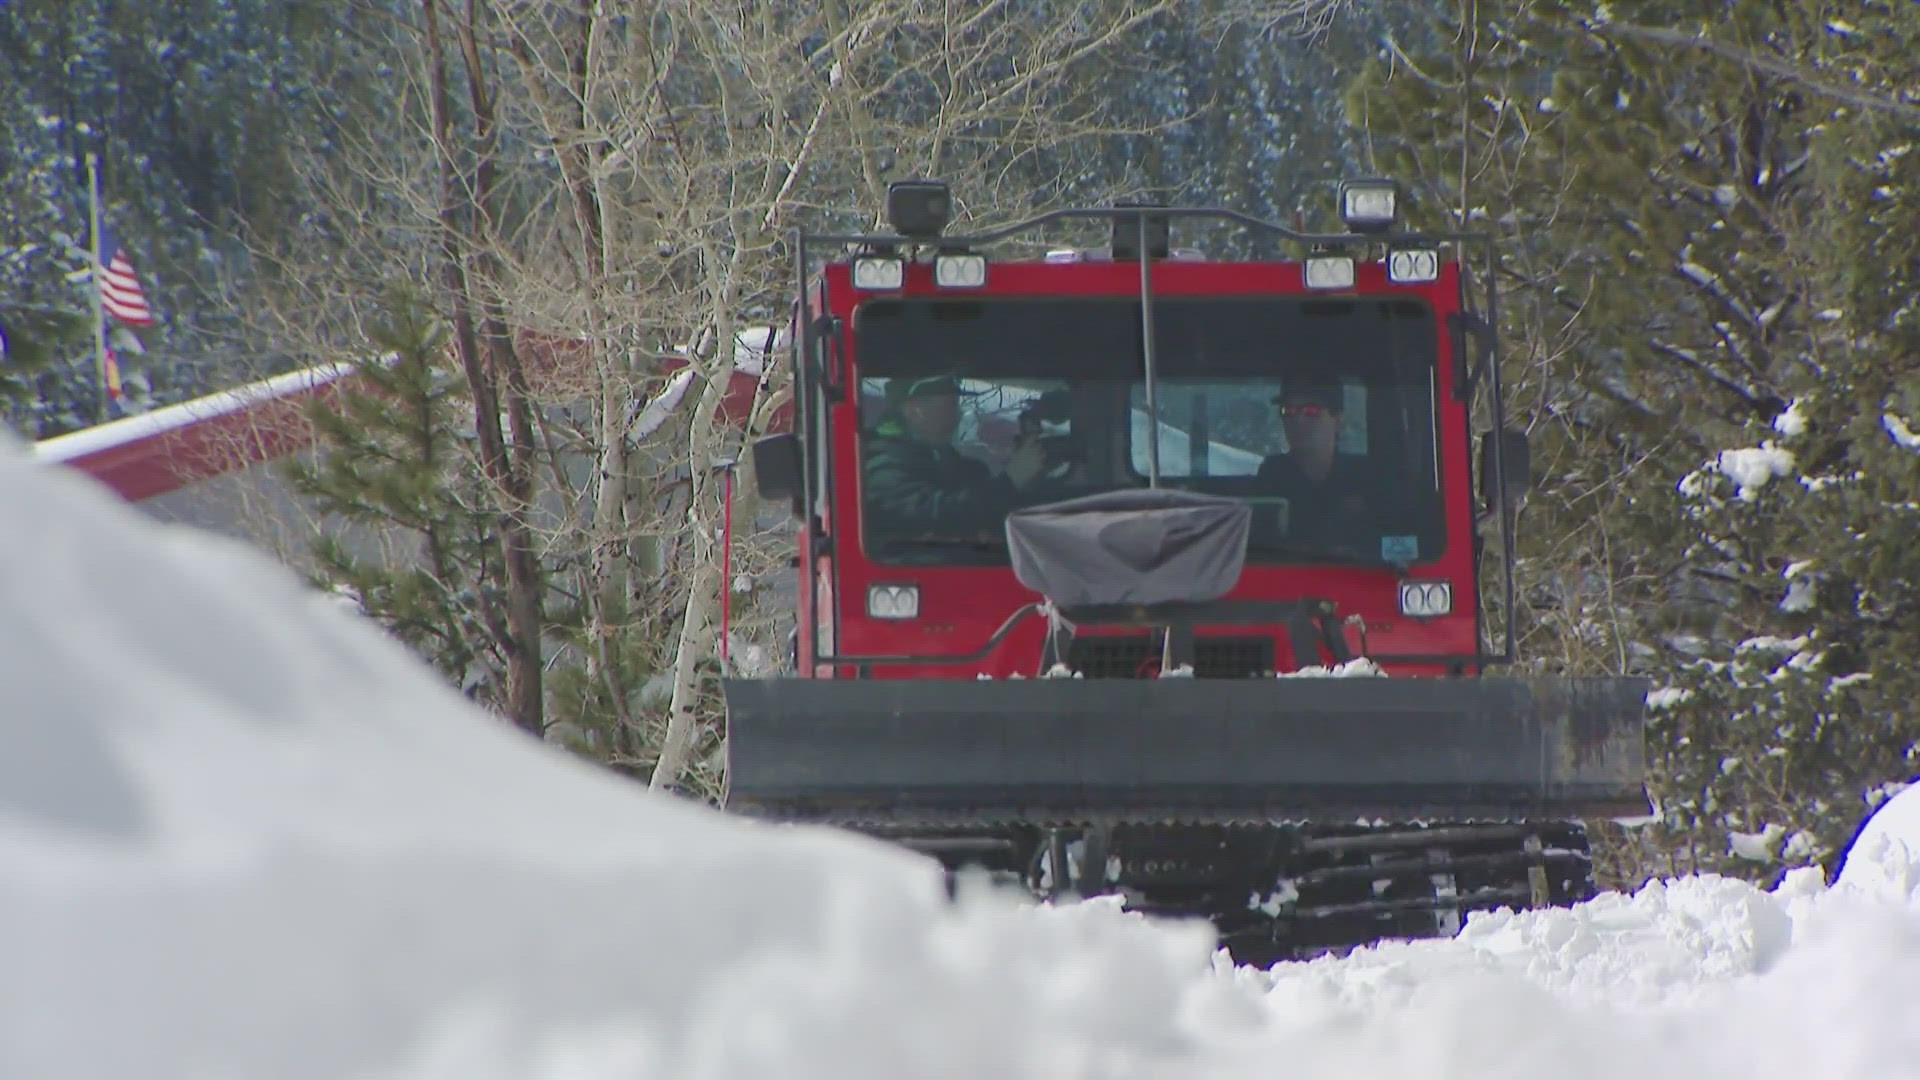 Colorado sheriff's office uses snowcat to rescue drivers in storm